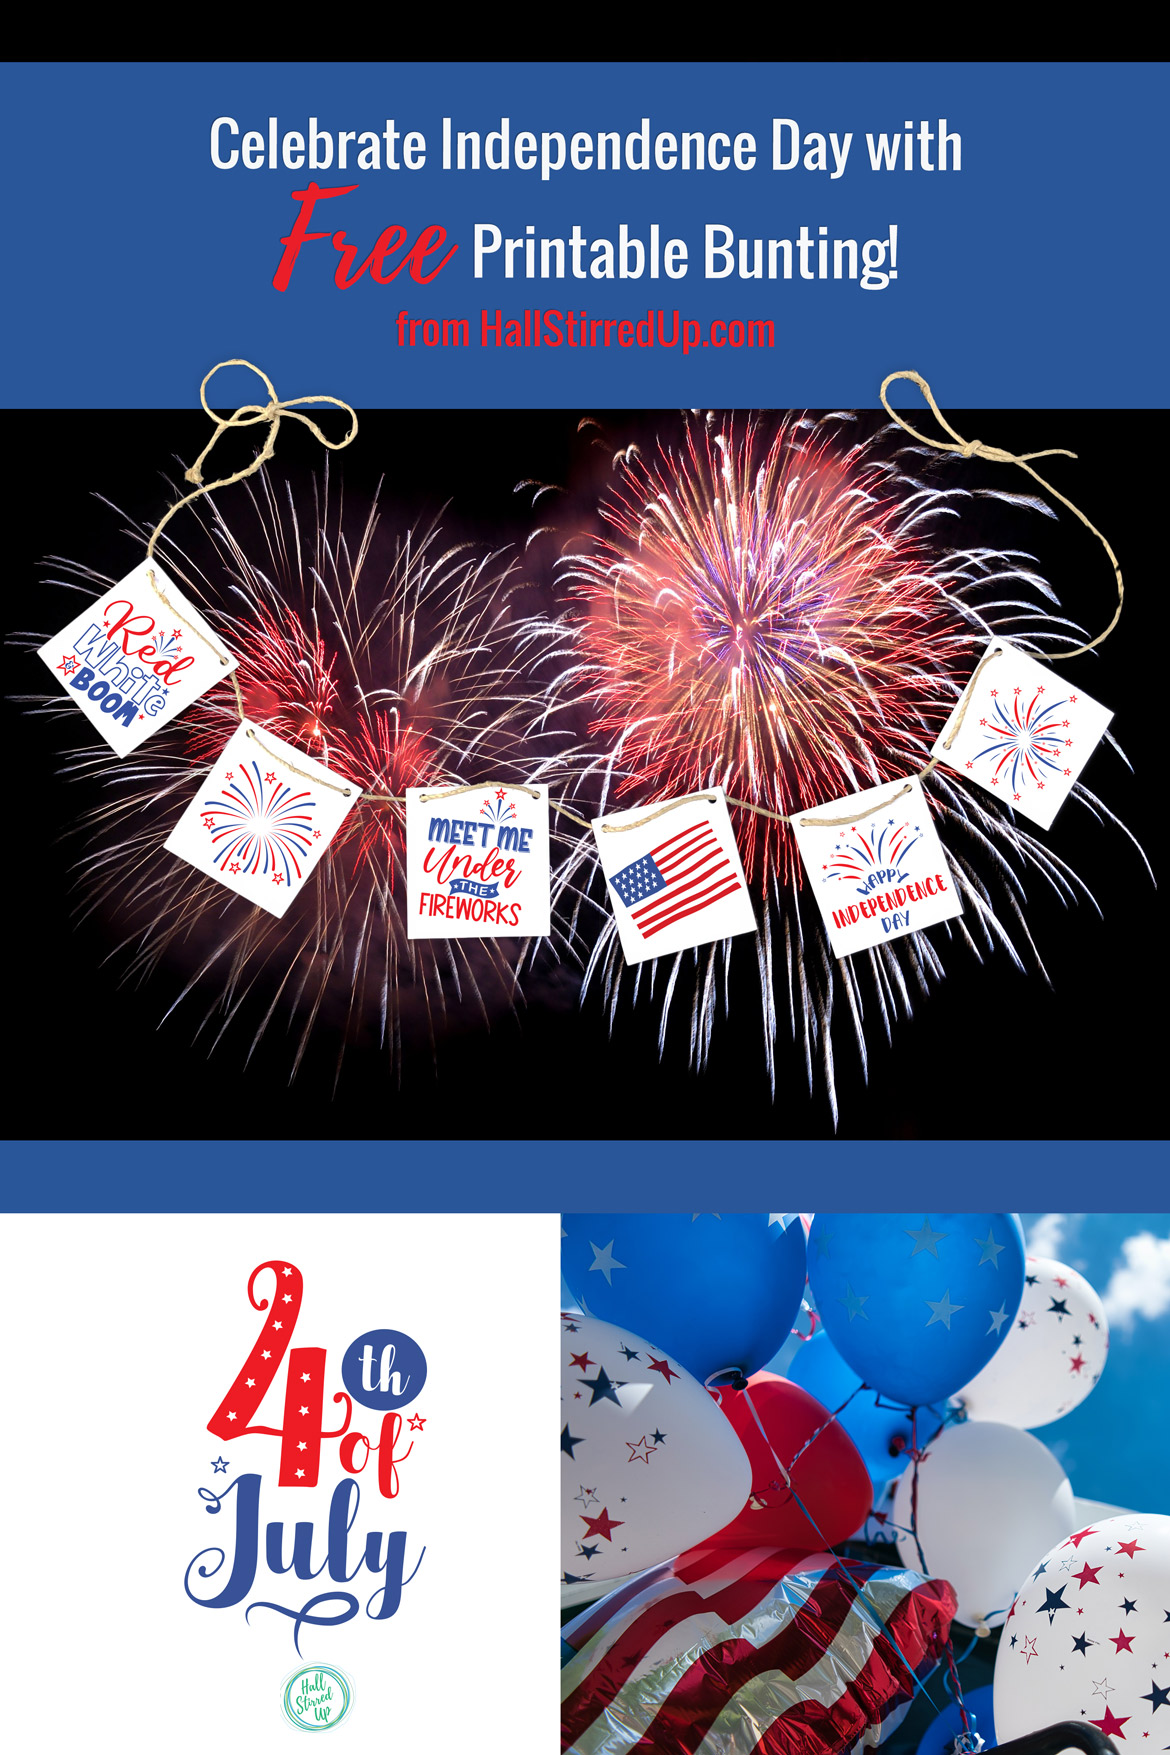 Celebrate Independence Day with a free printable bunting